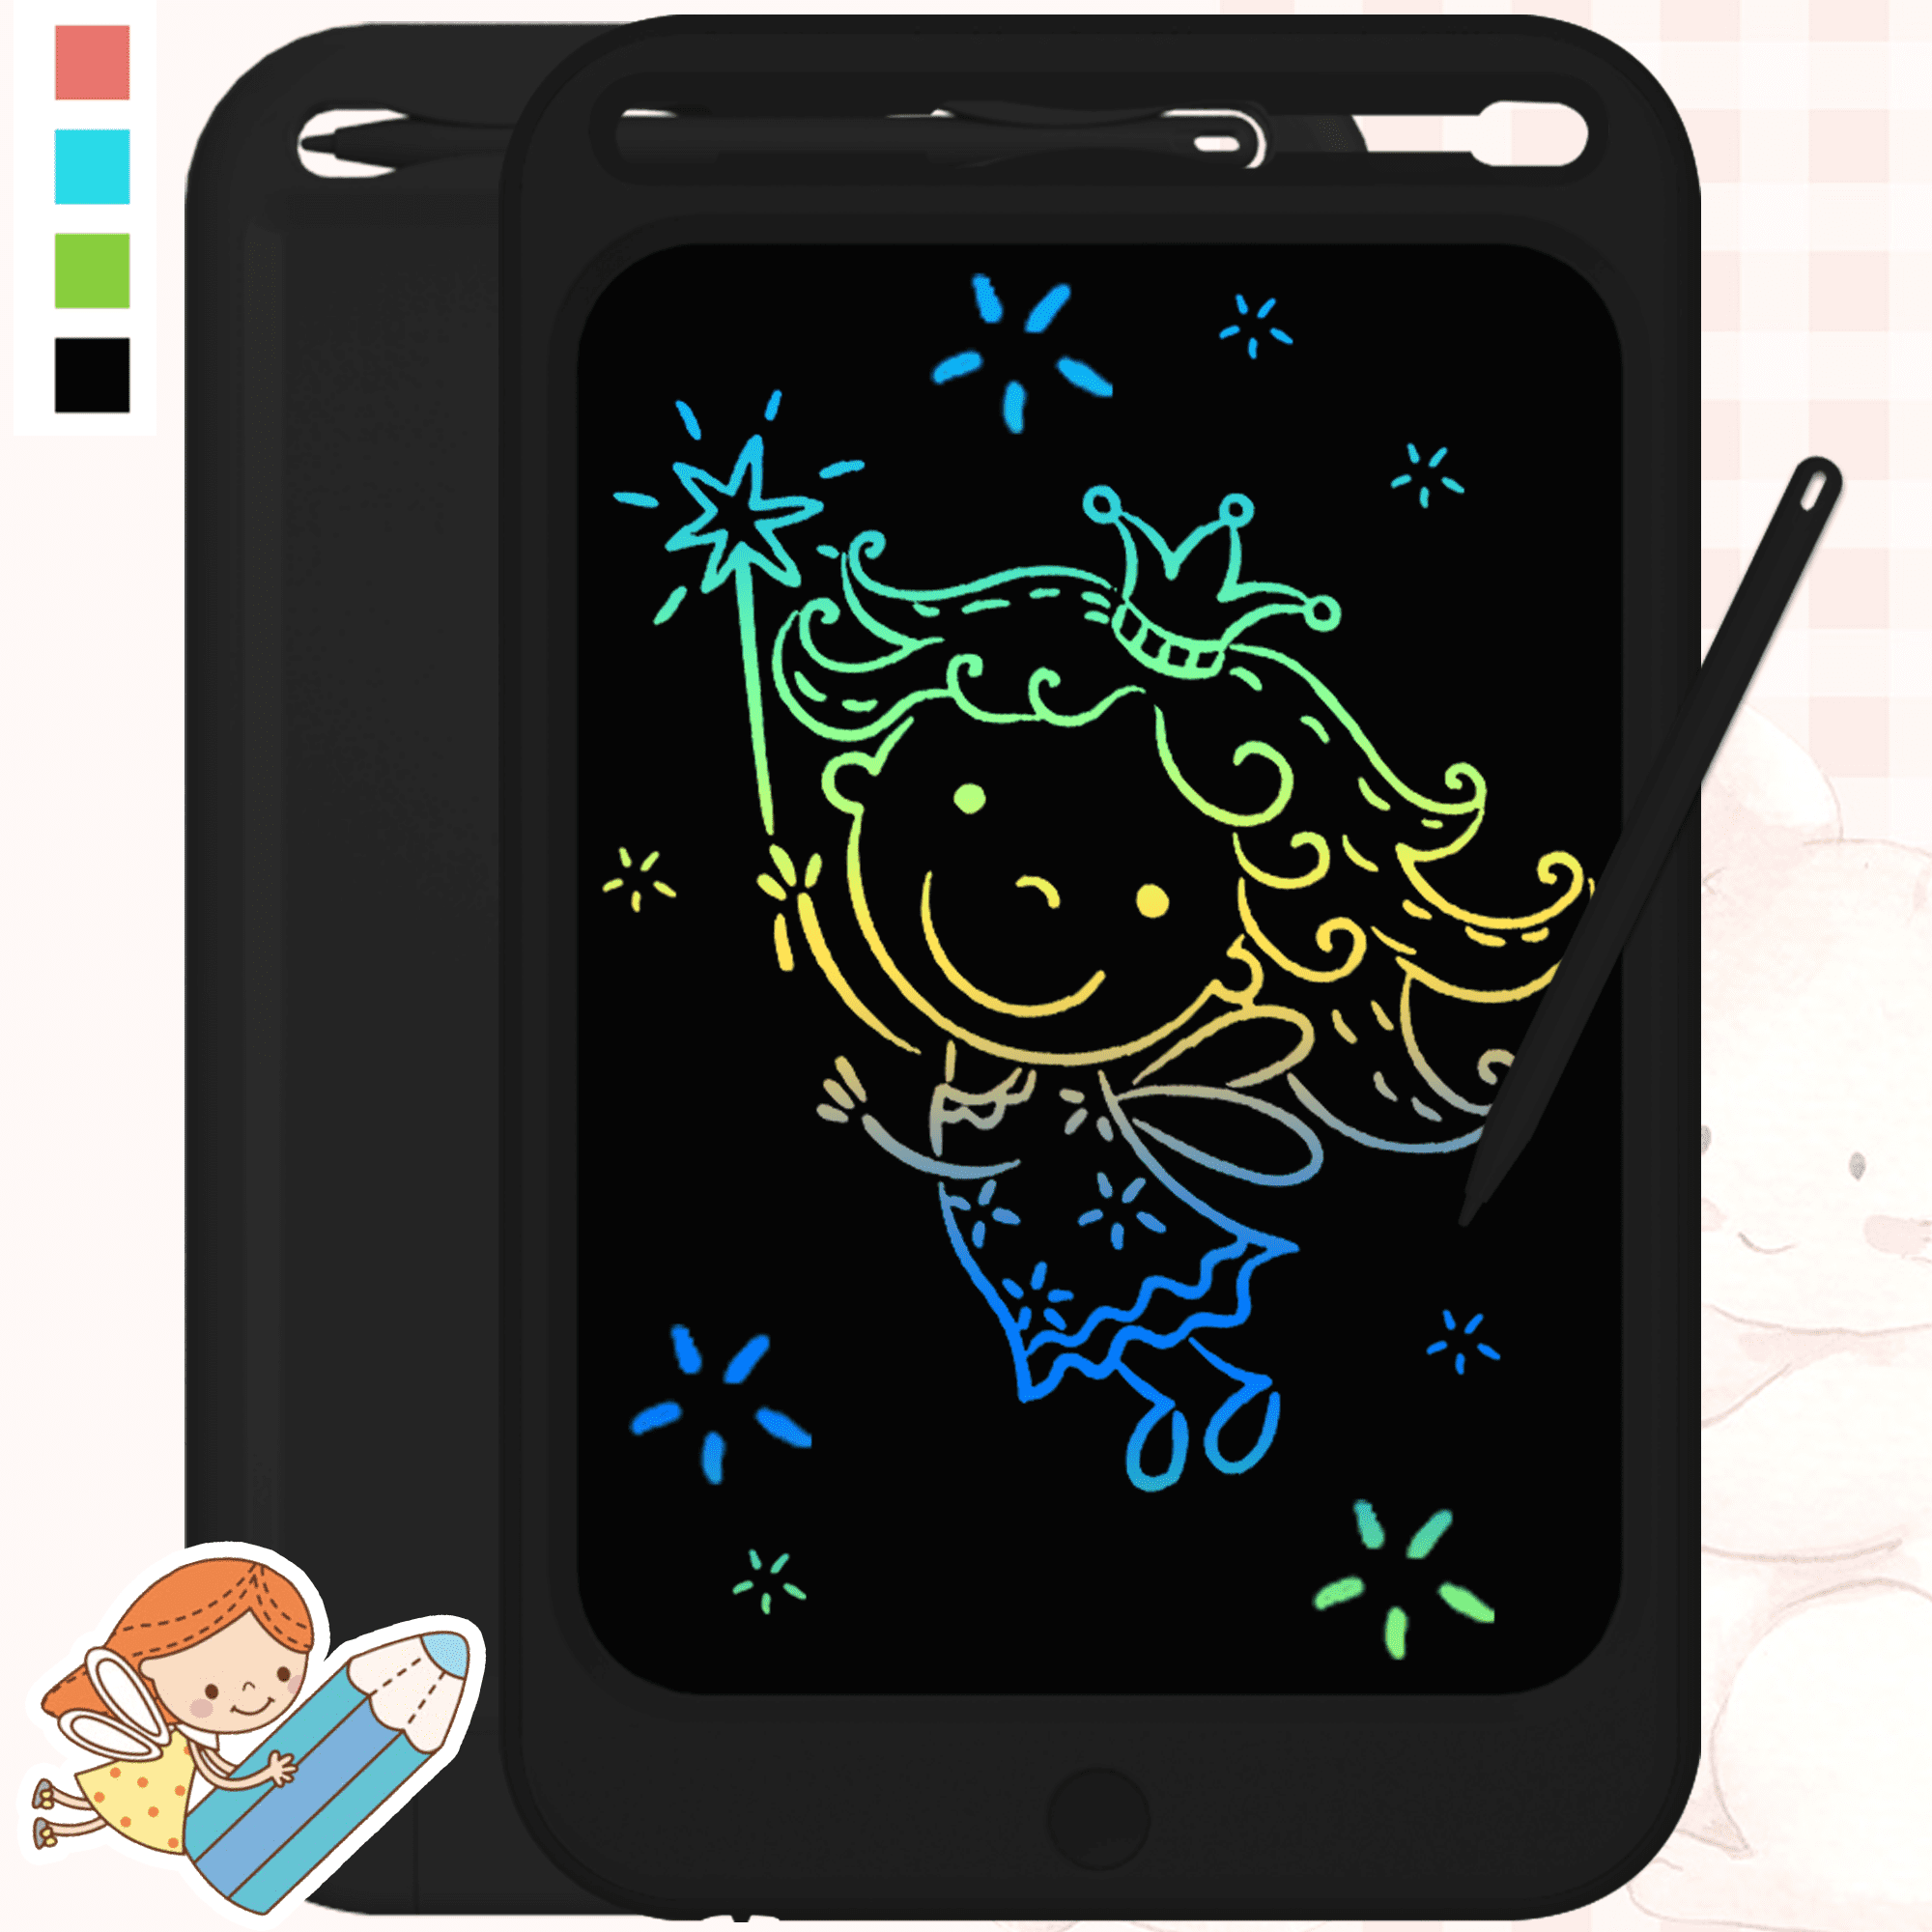 Source Kids 4.4-10.5 Inch Colorful Screen Etch a Sketch Drawing Board LCD  Writing Drawing Tablet For Toddler Toys on m.